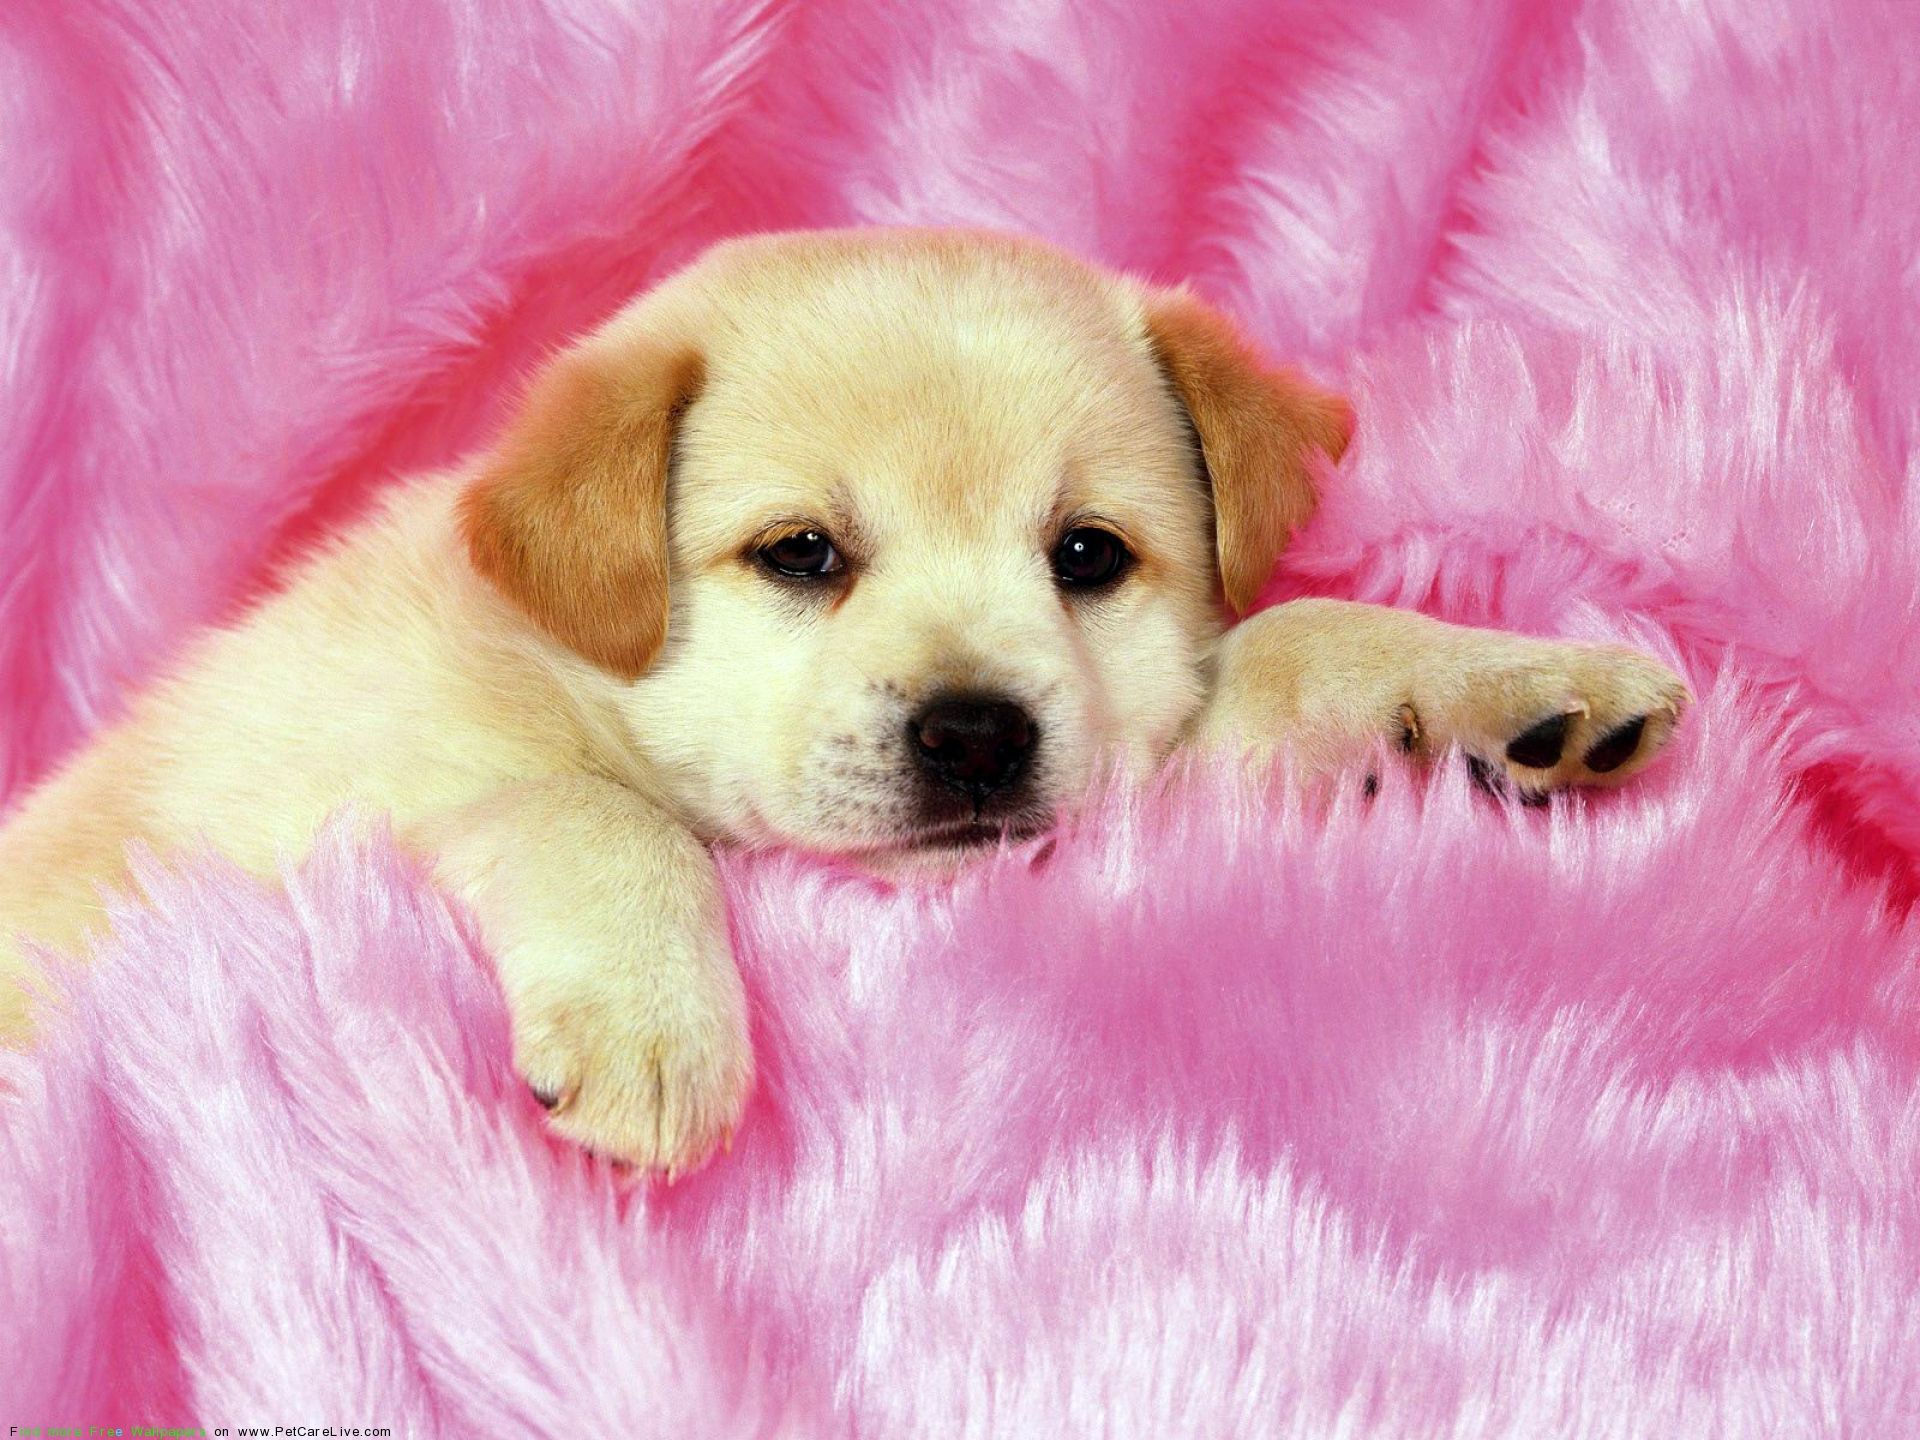 Cute Little Puppys Puppy Pictures Widescreen con pequeña alta calidad